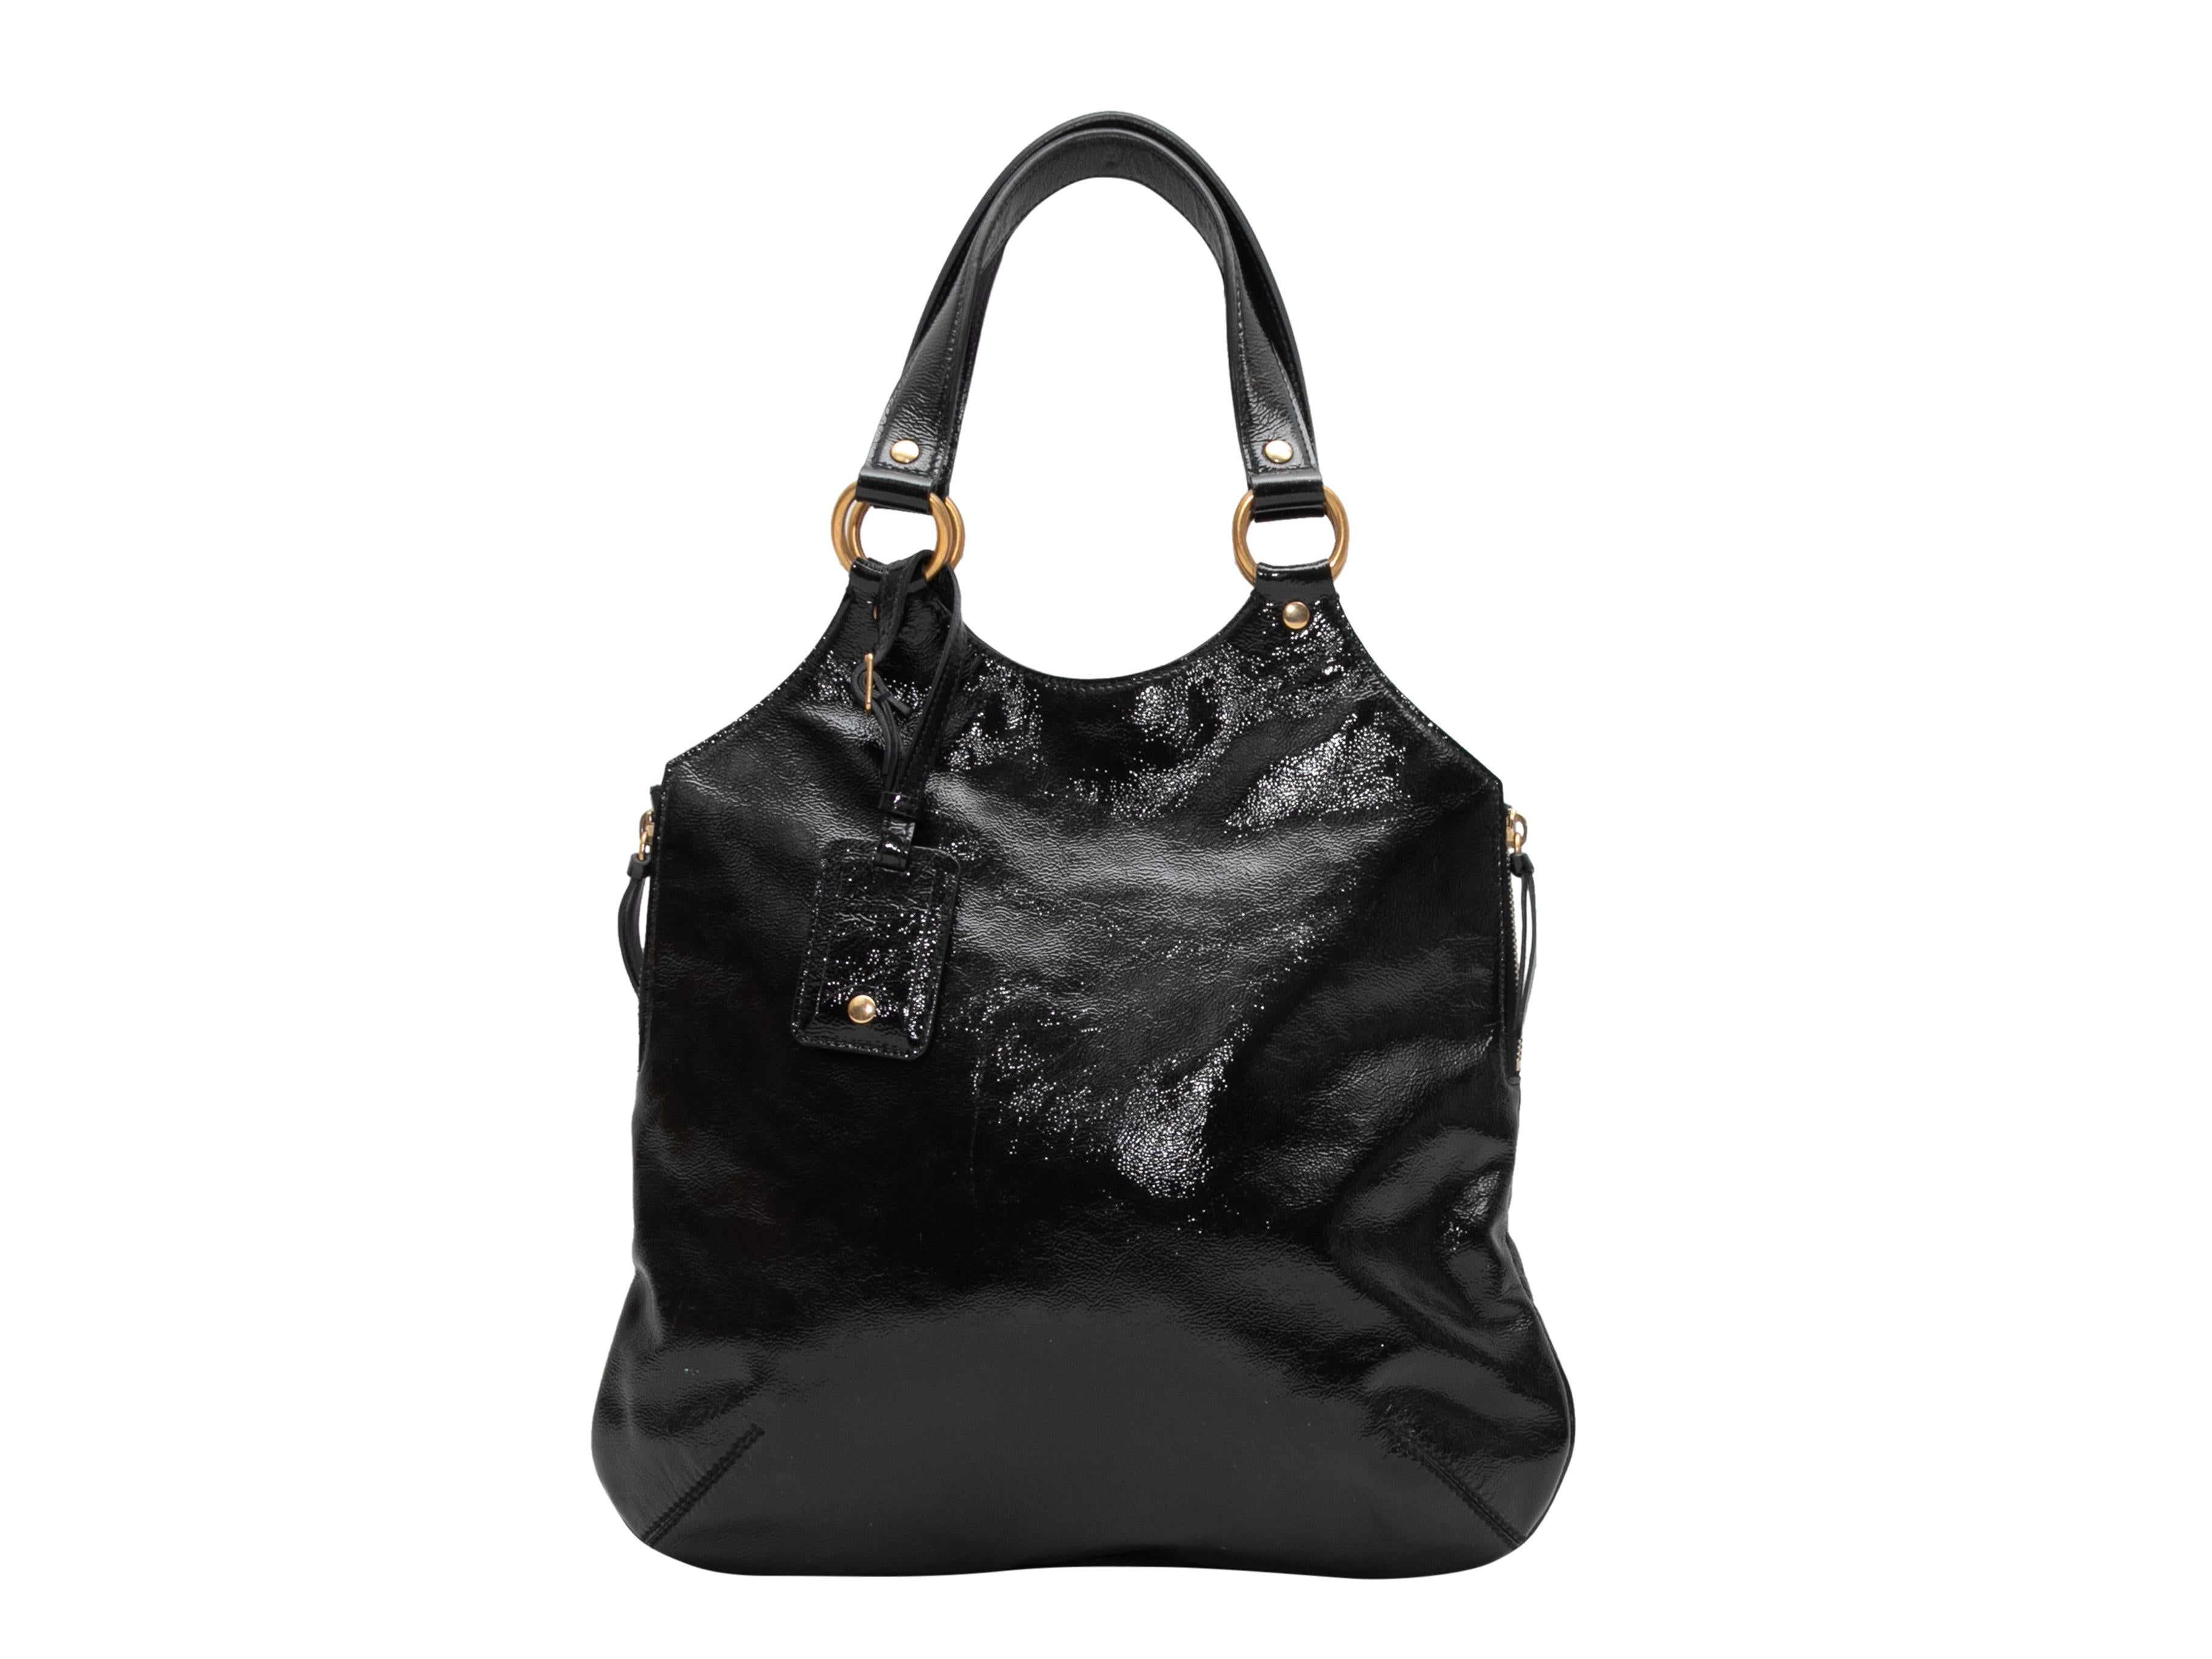 Black Yves Saint Laurent Patent Leather Handbag. This handbag features a patent leather body, gold-tone hardware, dual top handles, zip accents at sides, and a magnetic top closure. 13